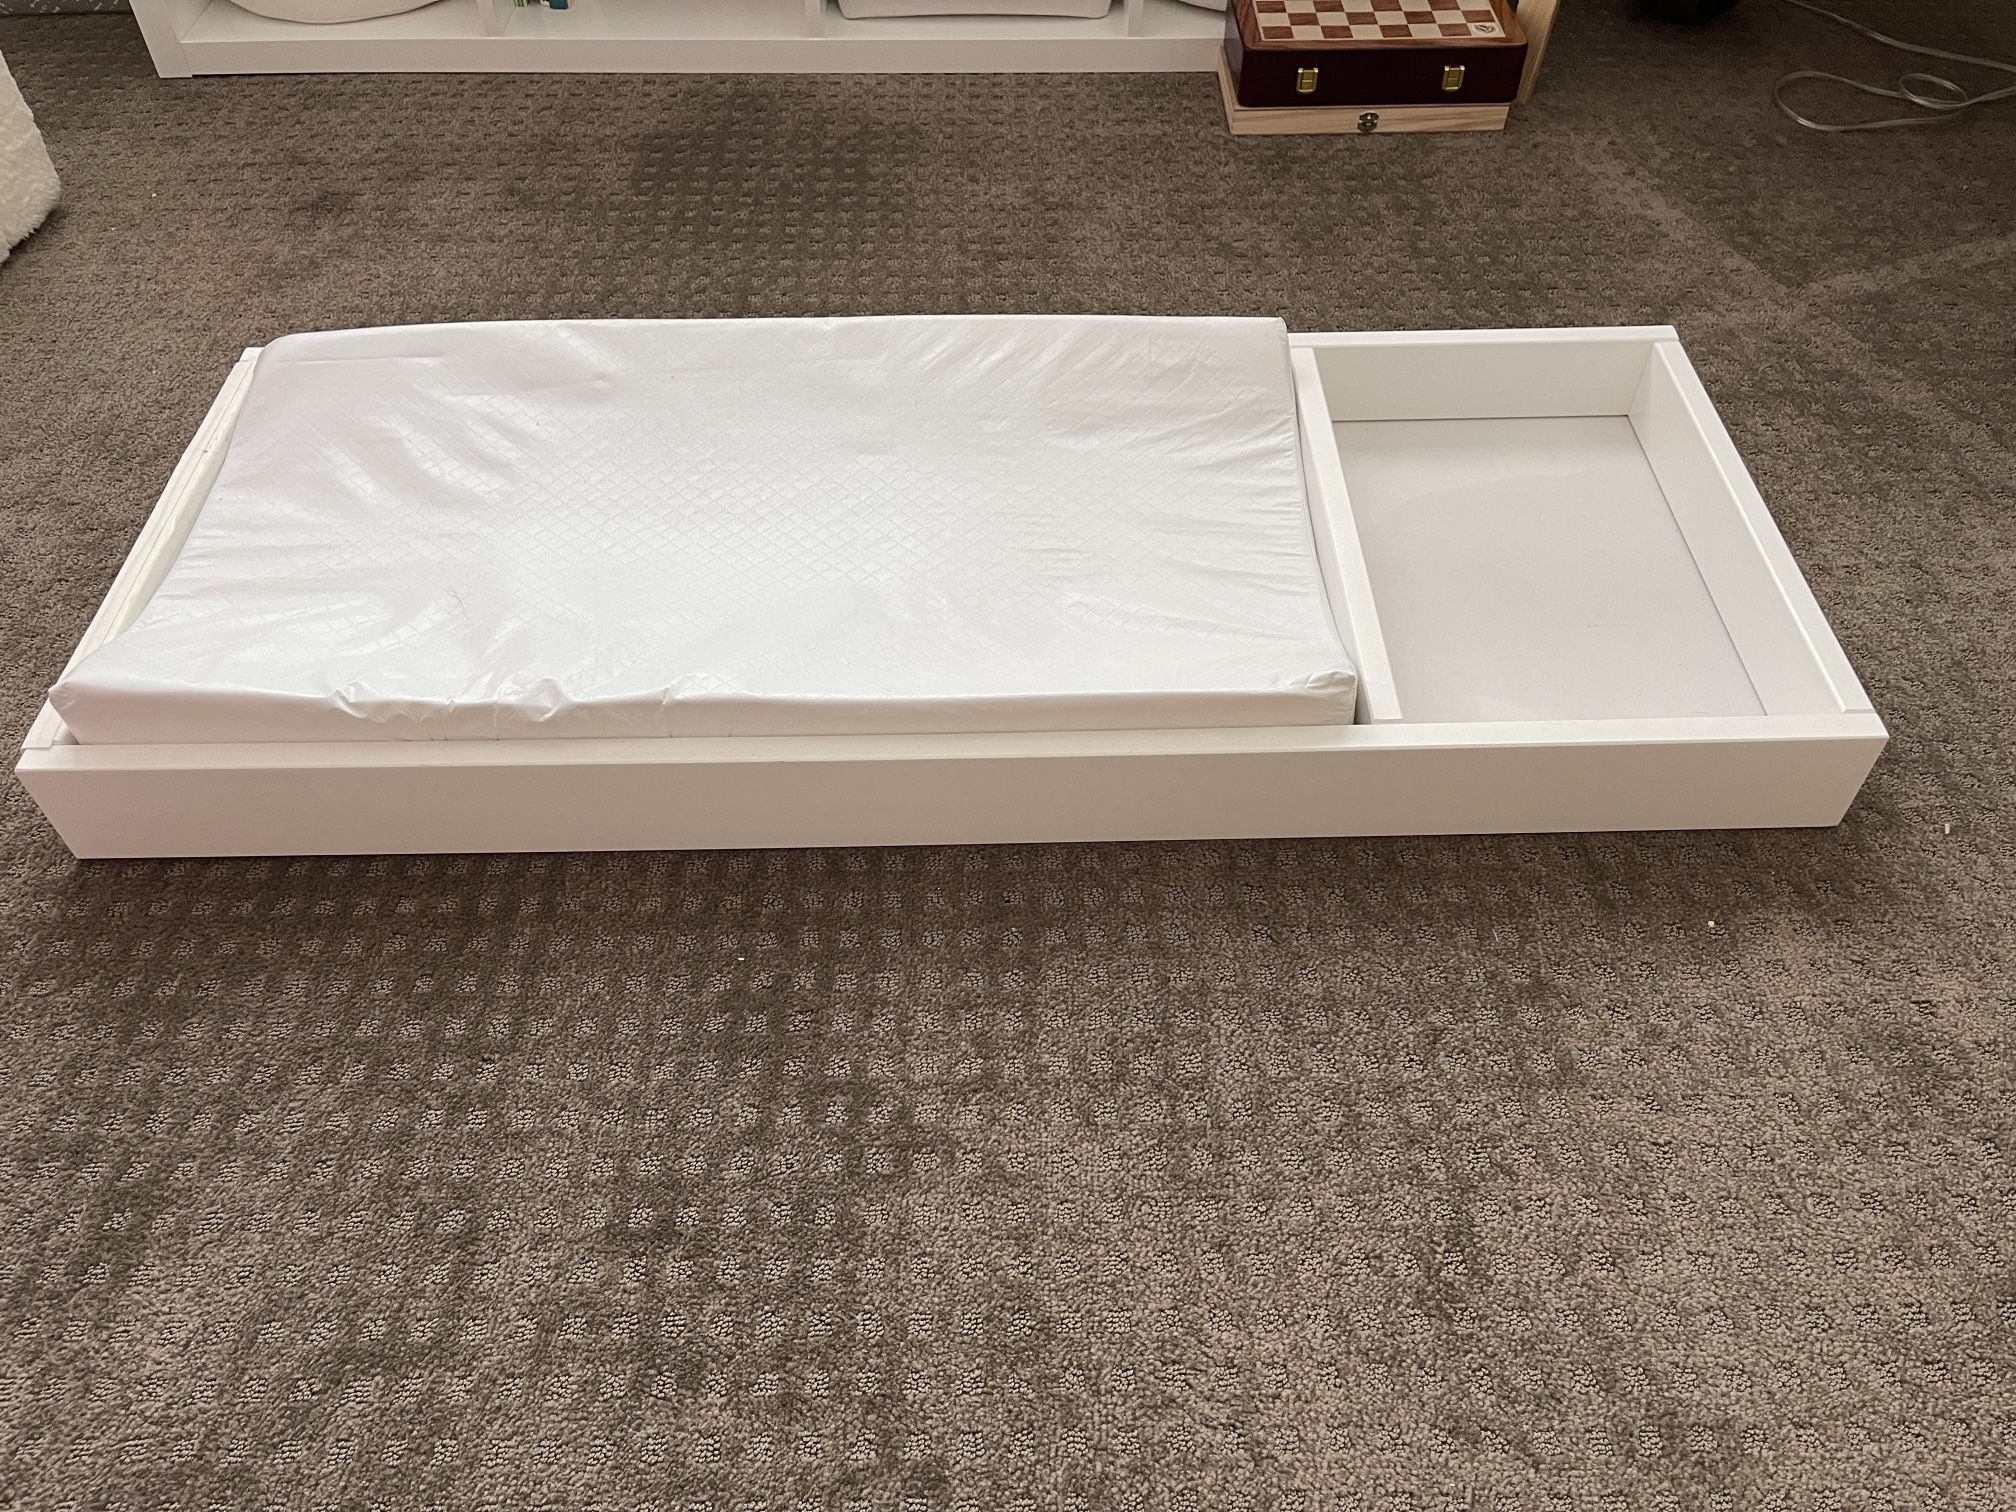 Chenging table topper and changing pad